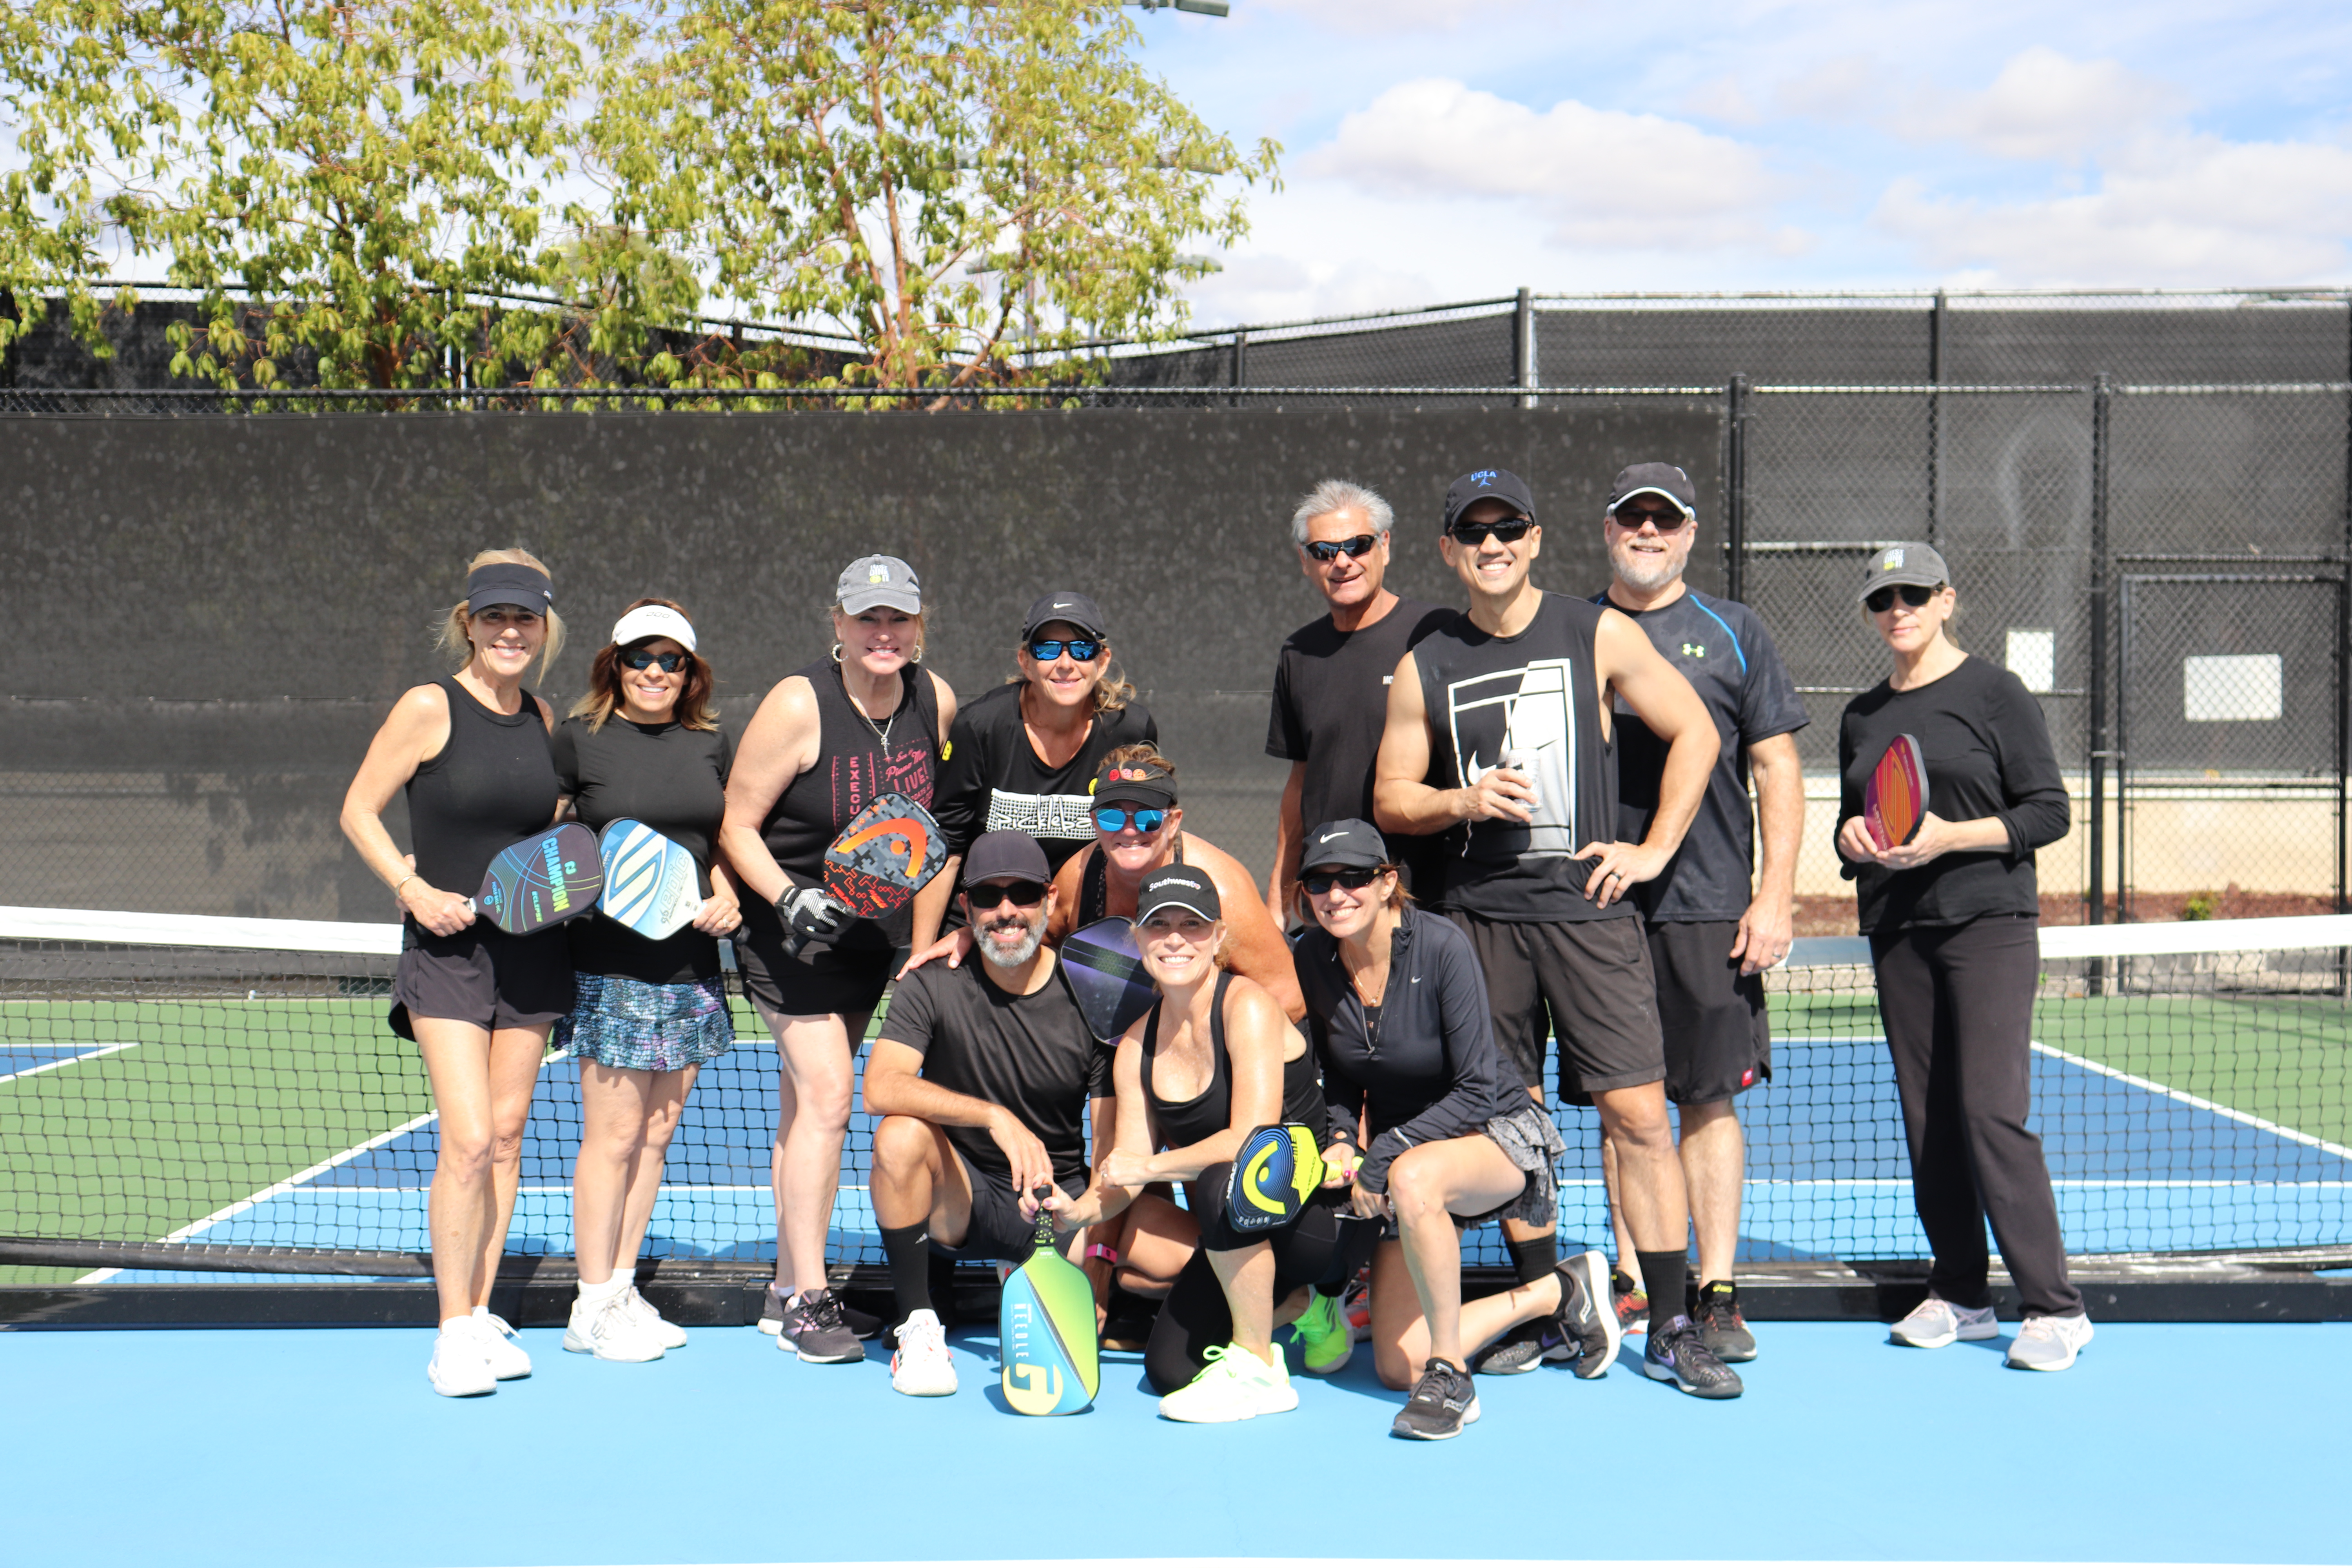 Top 6 Adult Sports to Play in Santa Clarita (4 Benefits)